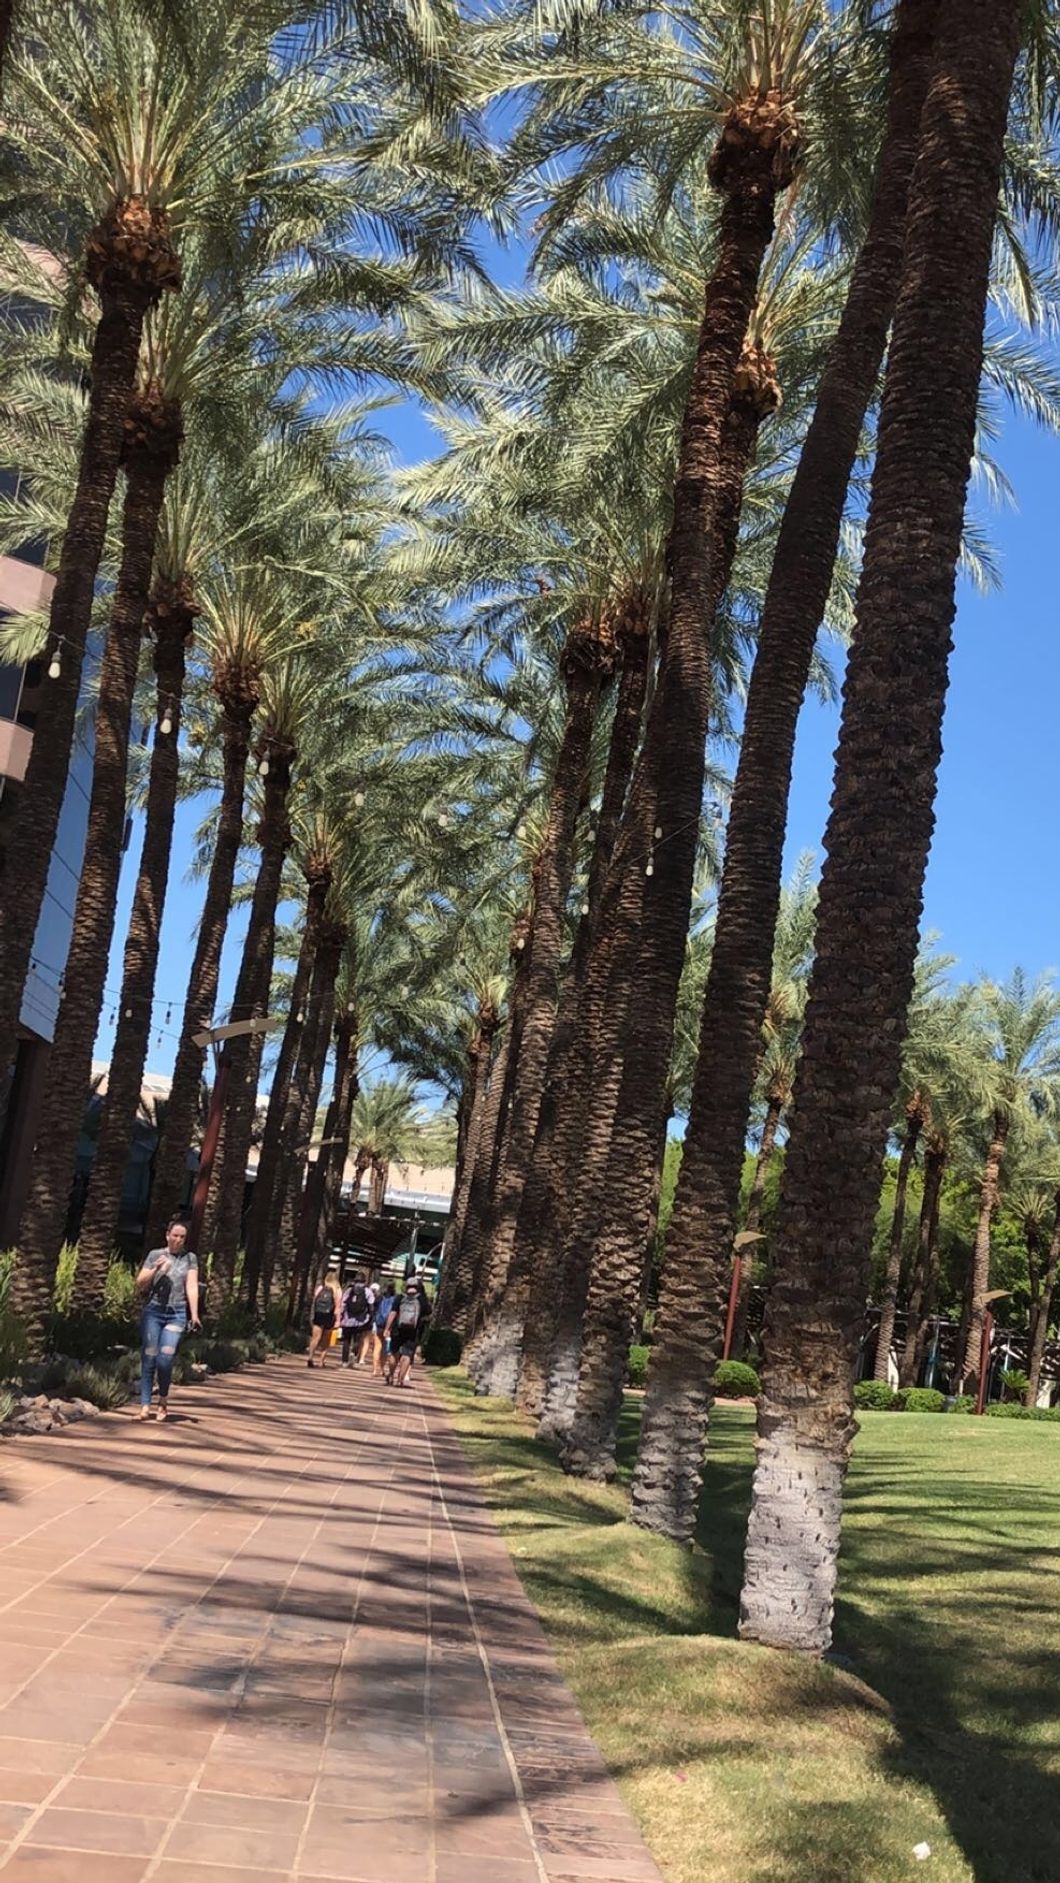 No matter what ASU campus you are on palm trees can be found.